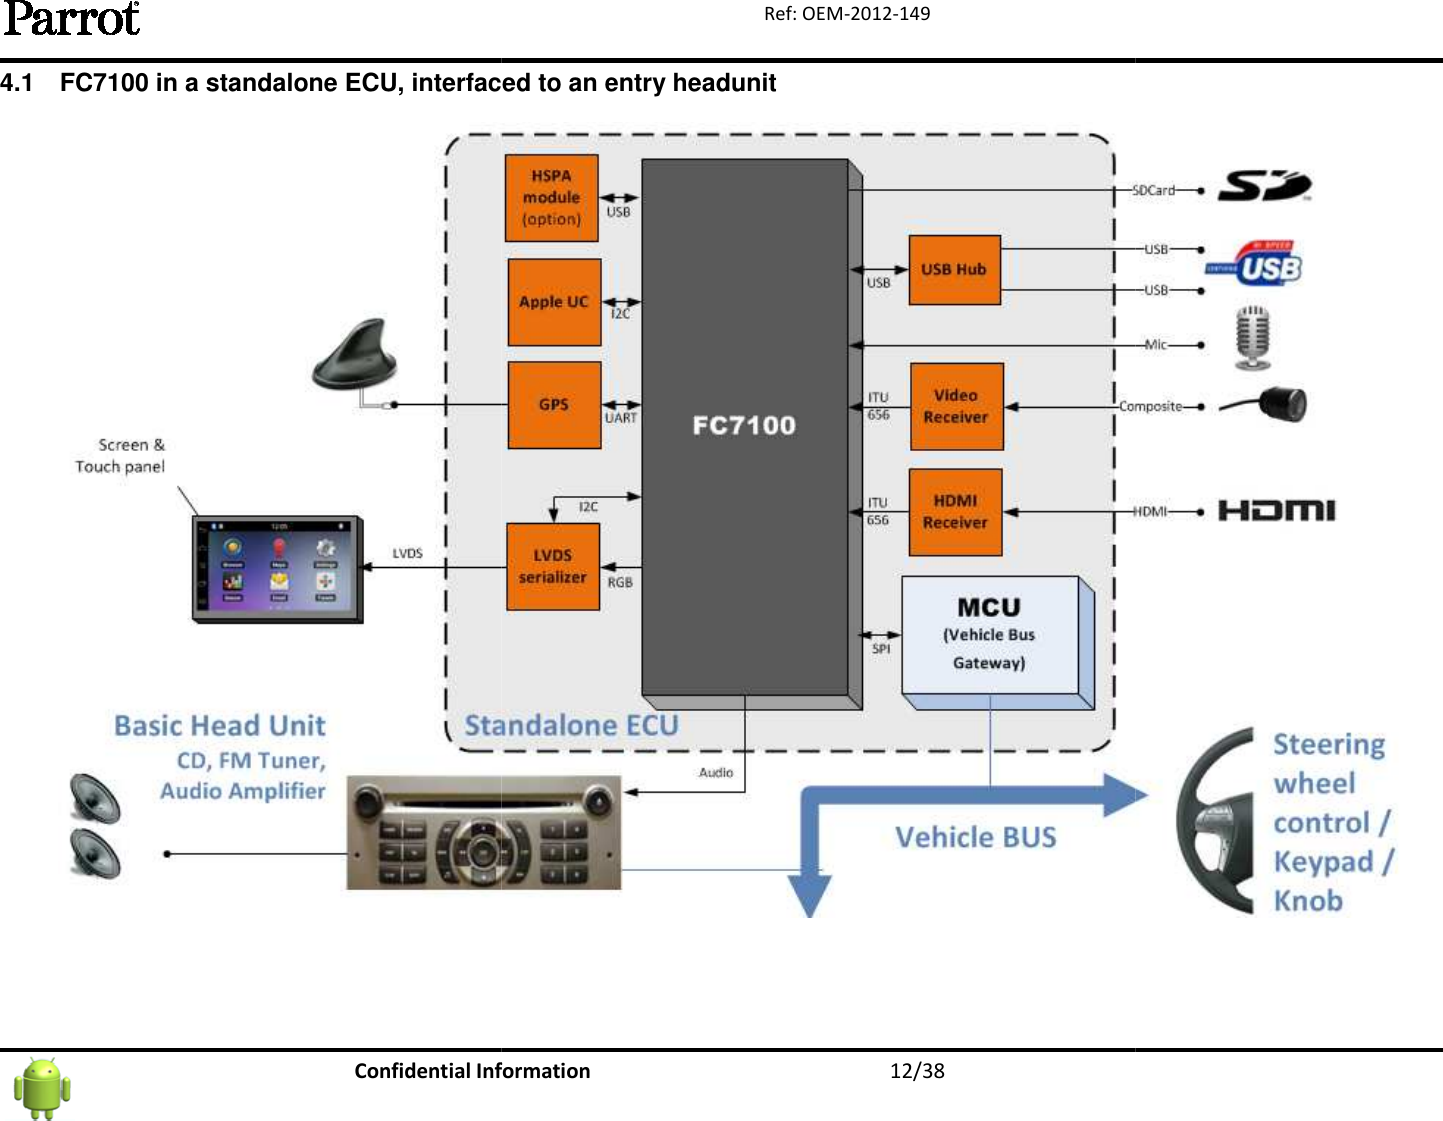   Confidential Information4.1 FC7100 in a standalone ECU, interfaced to an entry headunit Information  12/38 Ref: OEM-2012-149 FC7100 in a standalone ECU, interfaced to an entry headunit    